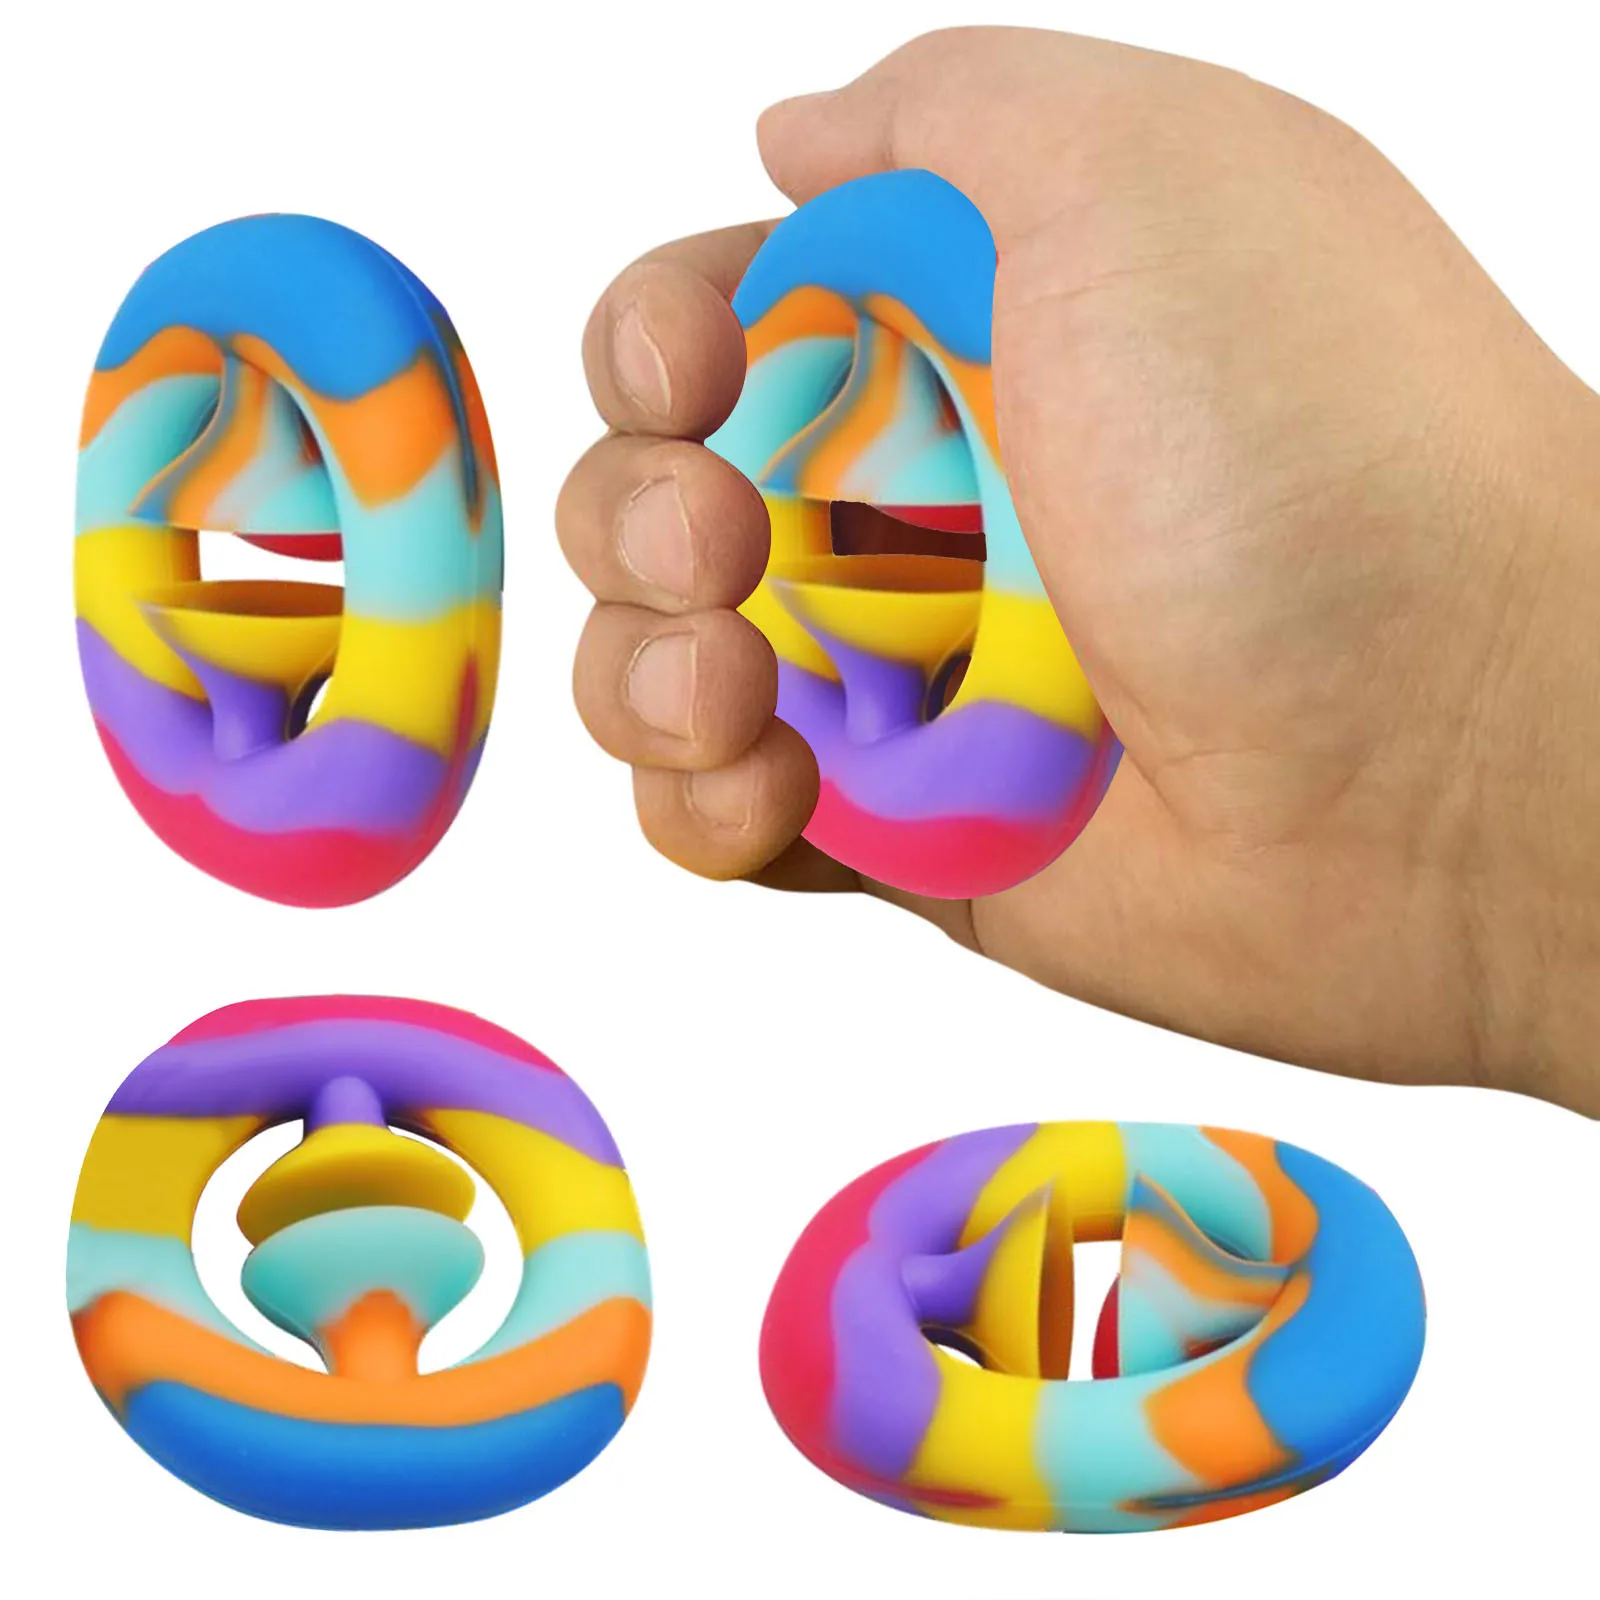 Figet Toys Ring Ball Antistress-Toys Autism Special Needs Anxiety Hand-Grip Reliever-Grip img1